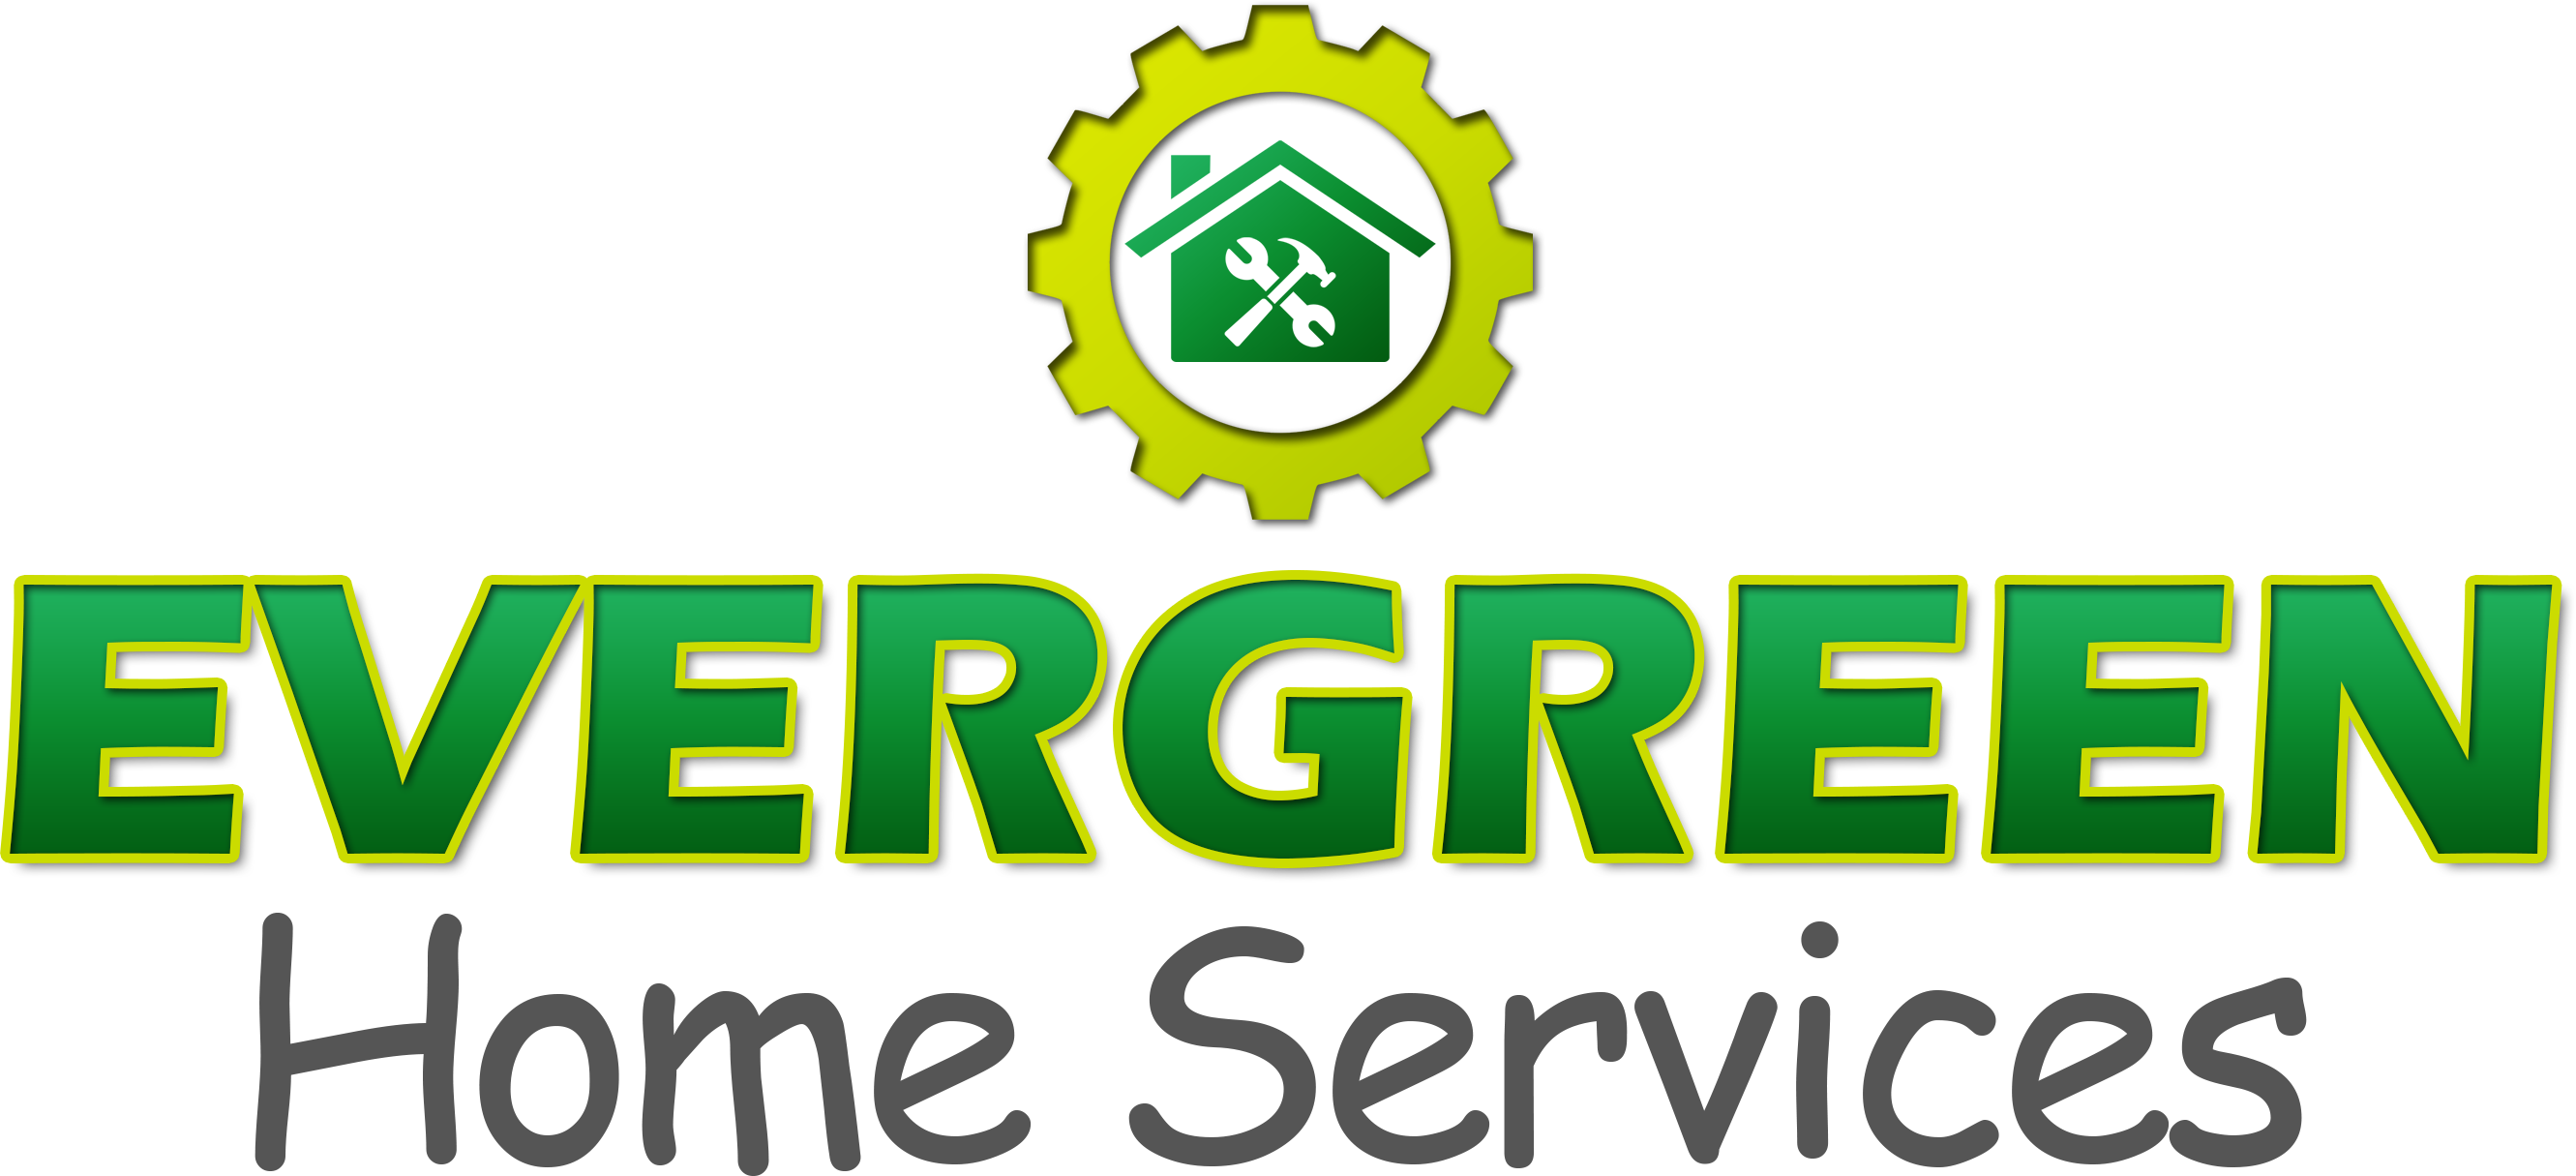 Evergreen Home Services